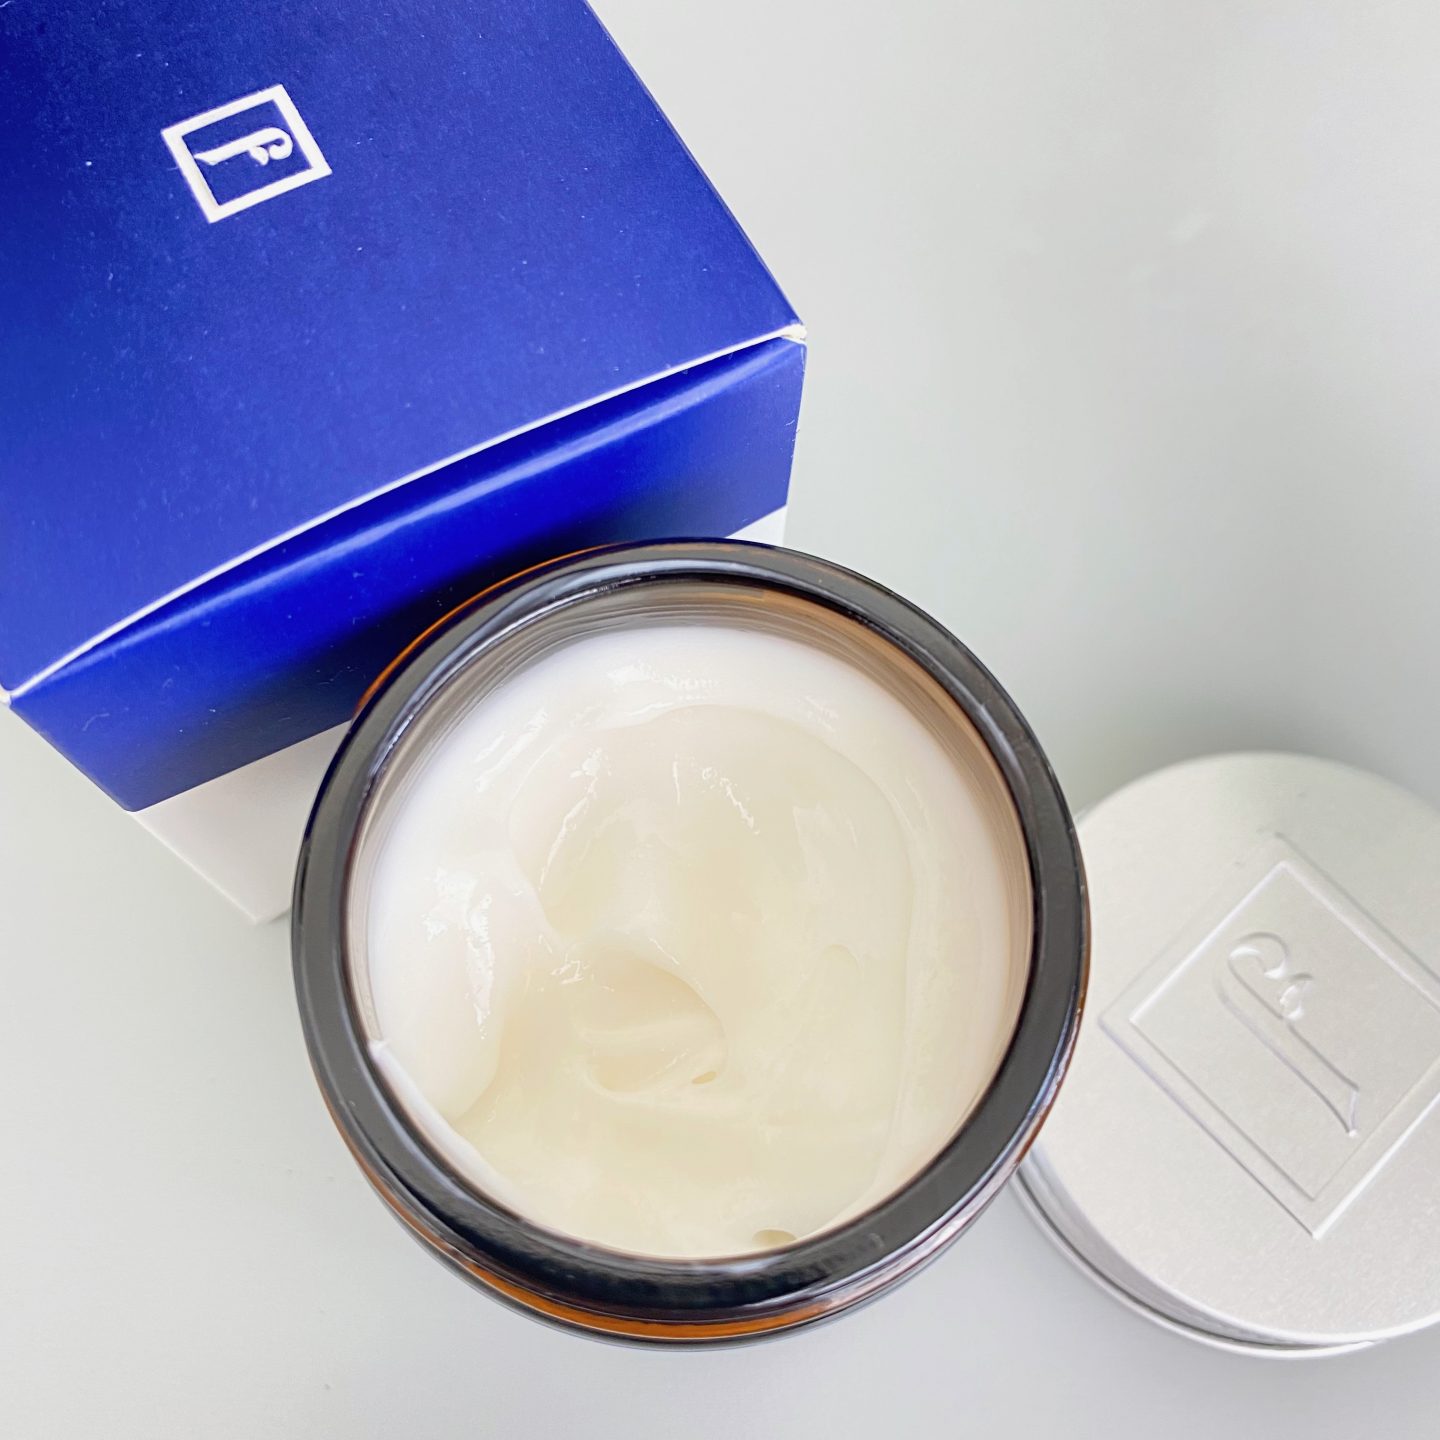 FaceTheory Relaxing Night Cream Pro Review